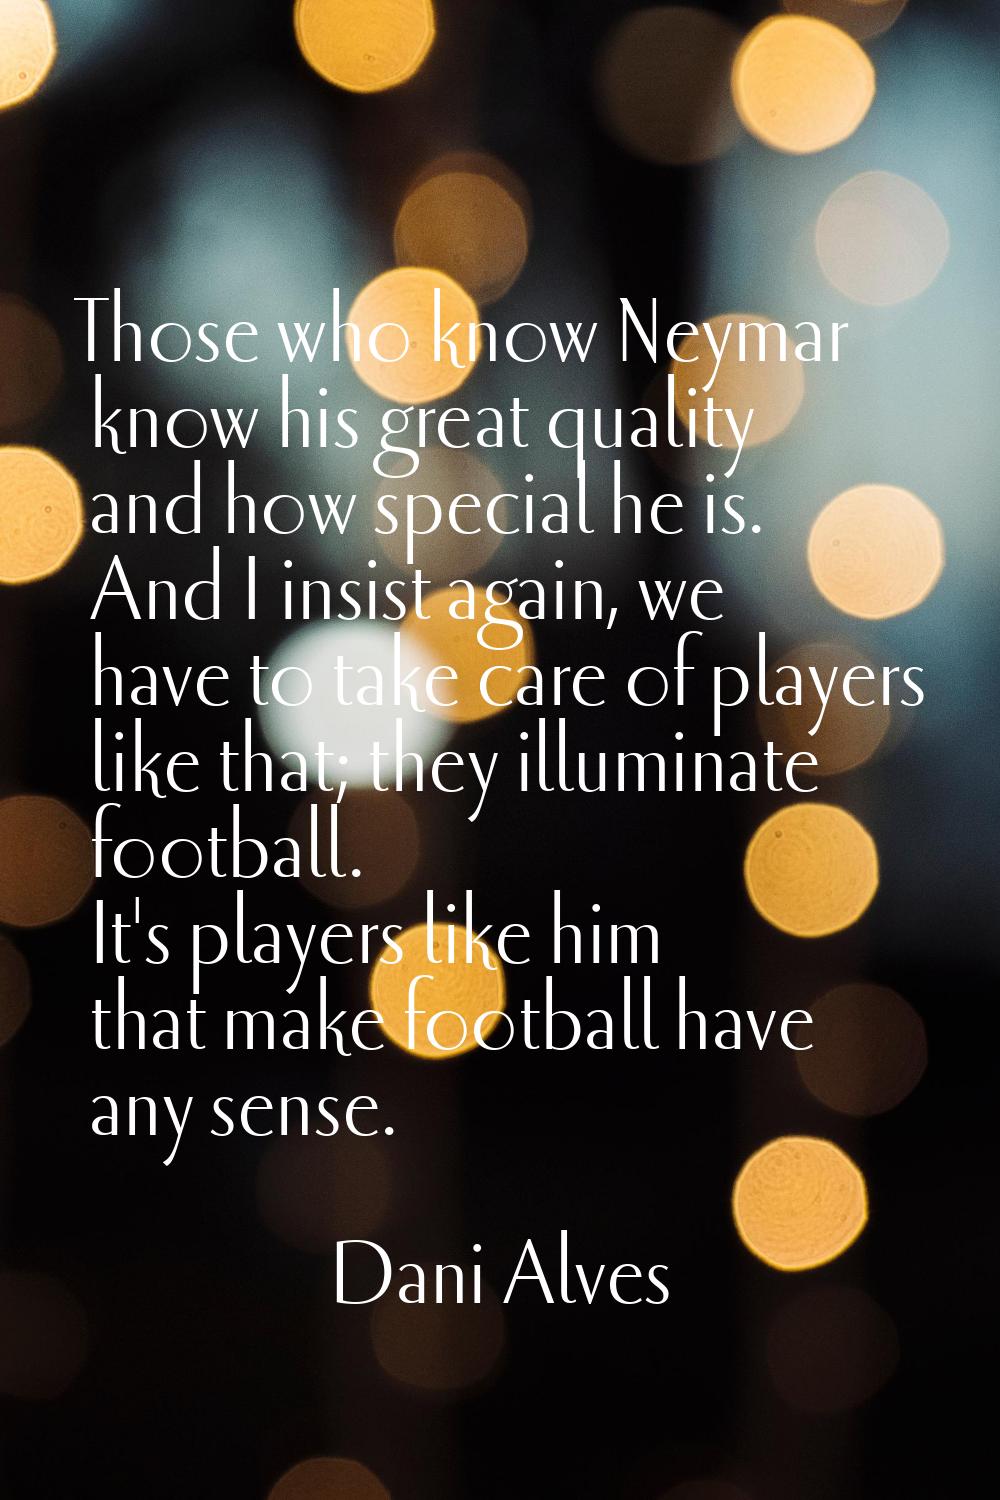 Those who know Neymar know his great quality and how special he is. And I insist again, we have to 